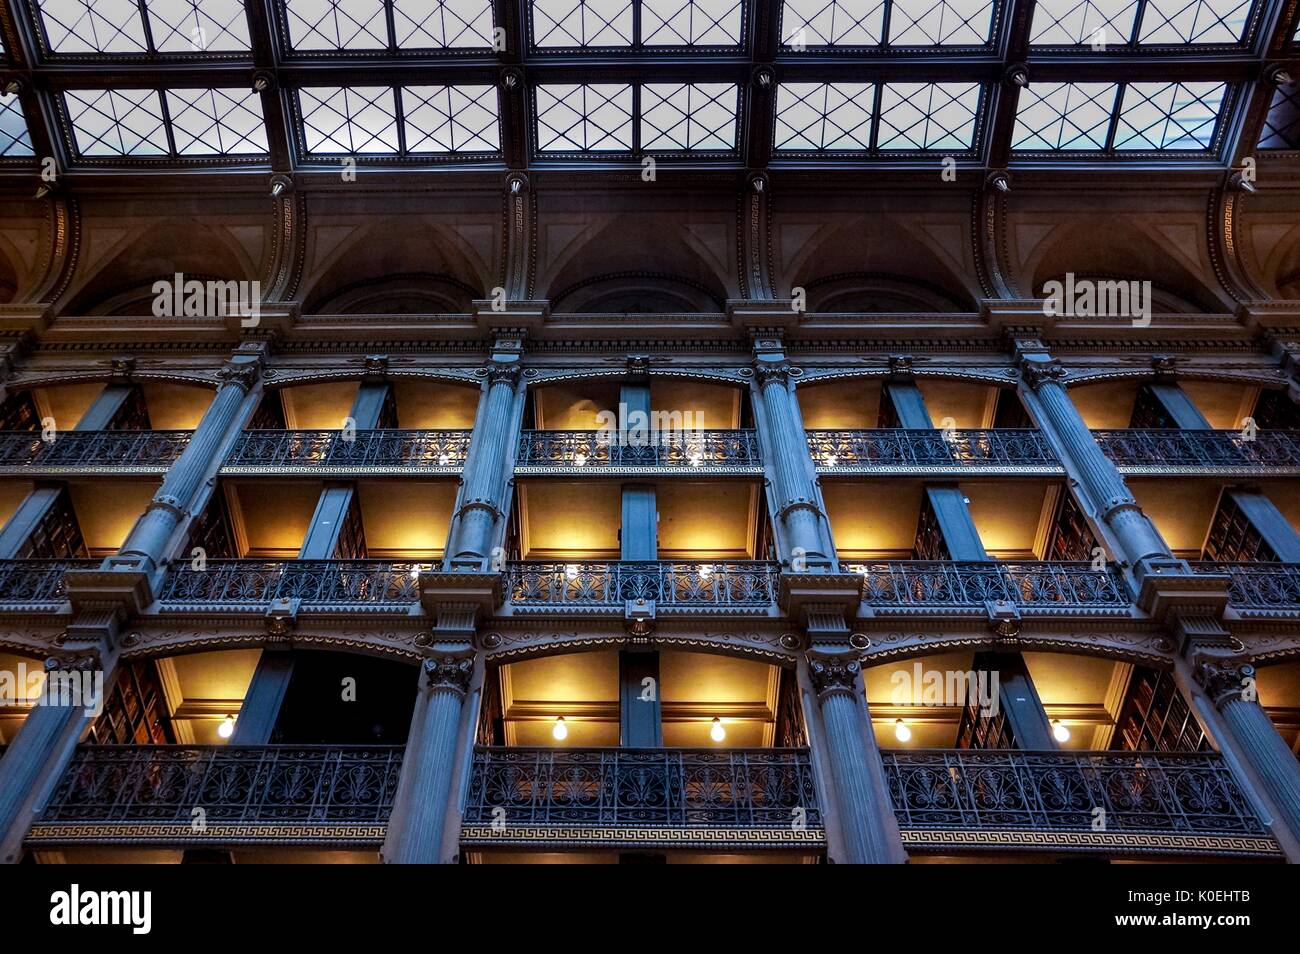 A low-angle shot of the levels of the George Peabody Library, a research library for Johns Hopkins University, with cast iron railings and exposed glowing light bulbs lighting the full bookshelves during the Baltimore Book Festival, Baltimore, Maryland, September 28, 2013. Courtesy Eric Chen. Stock Photo